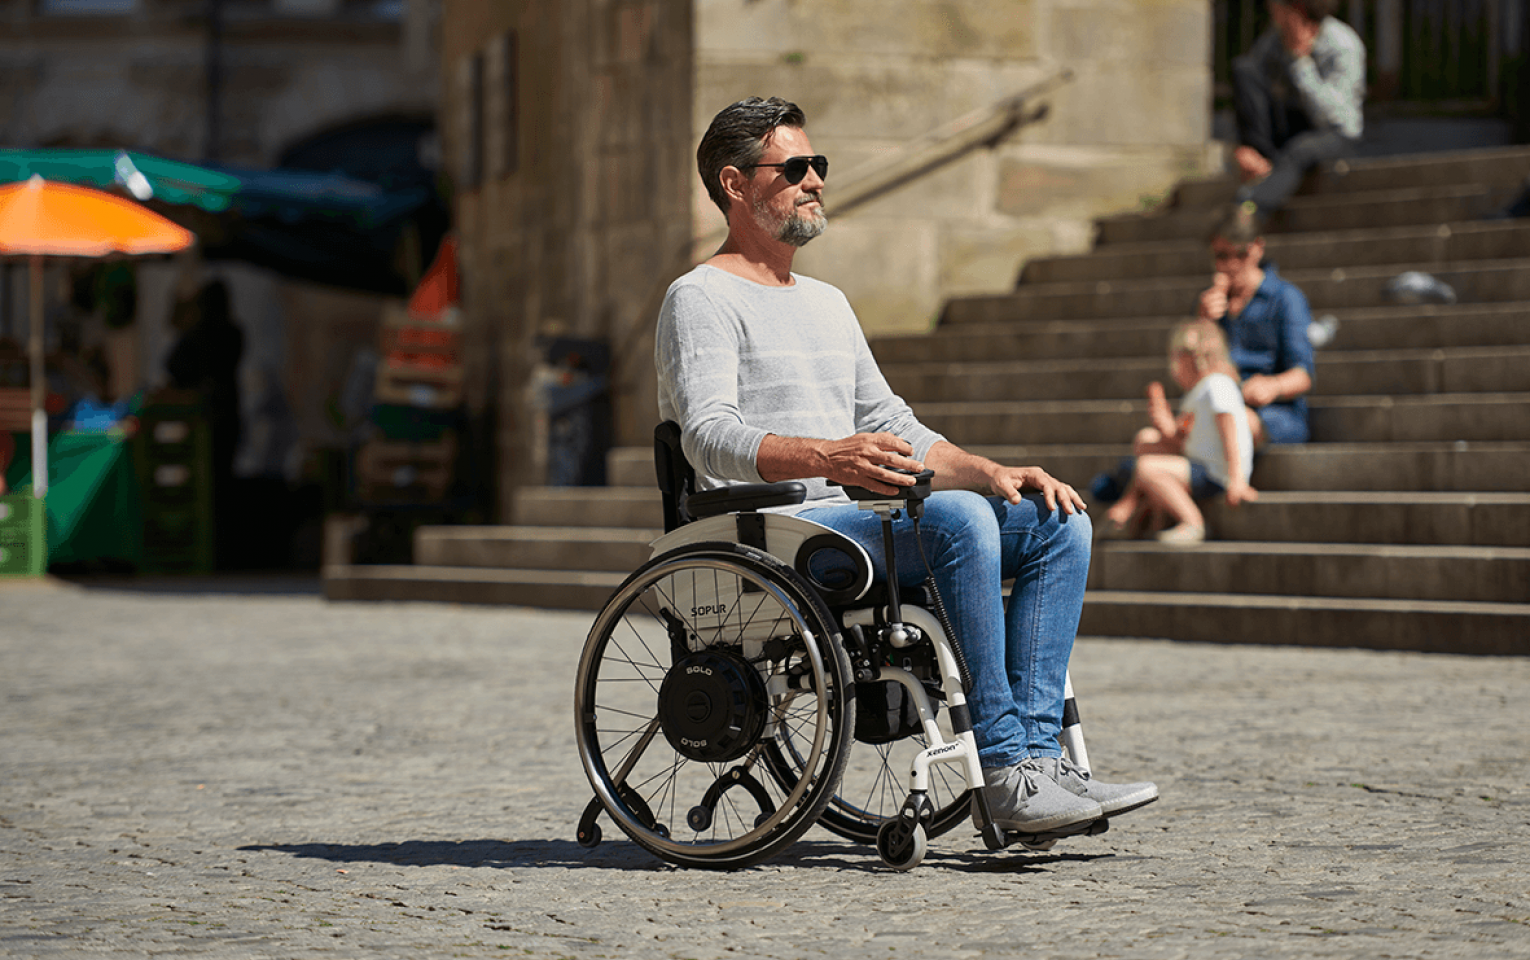 The picture shows a middle-aged man driving his wheelchair through a sunny city center. He is driving over cobblestones and steering his wheelchair himself using a joystick. The wheelchair wheels are fitted with a SOLO wheel hub drive that powers the wheels. 